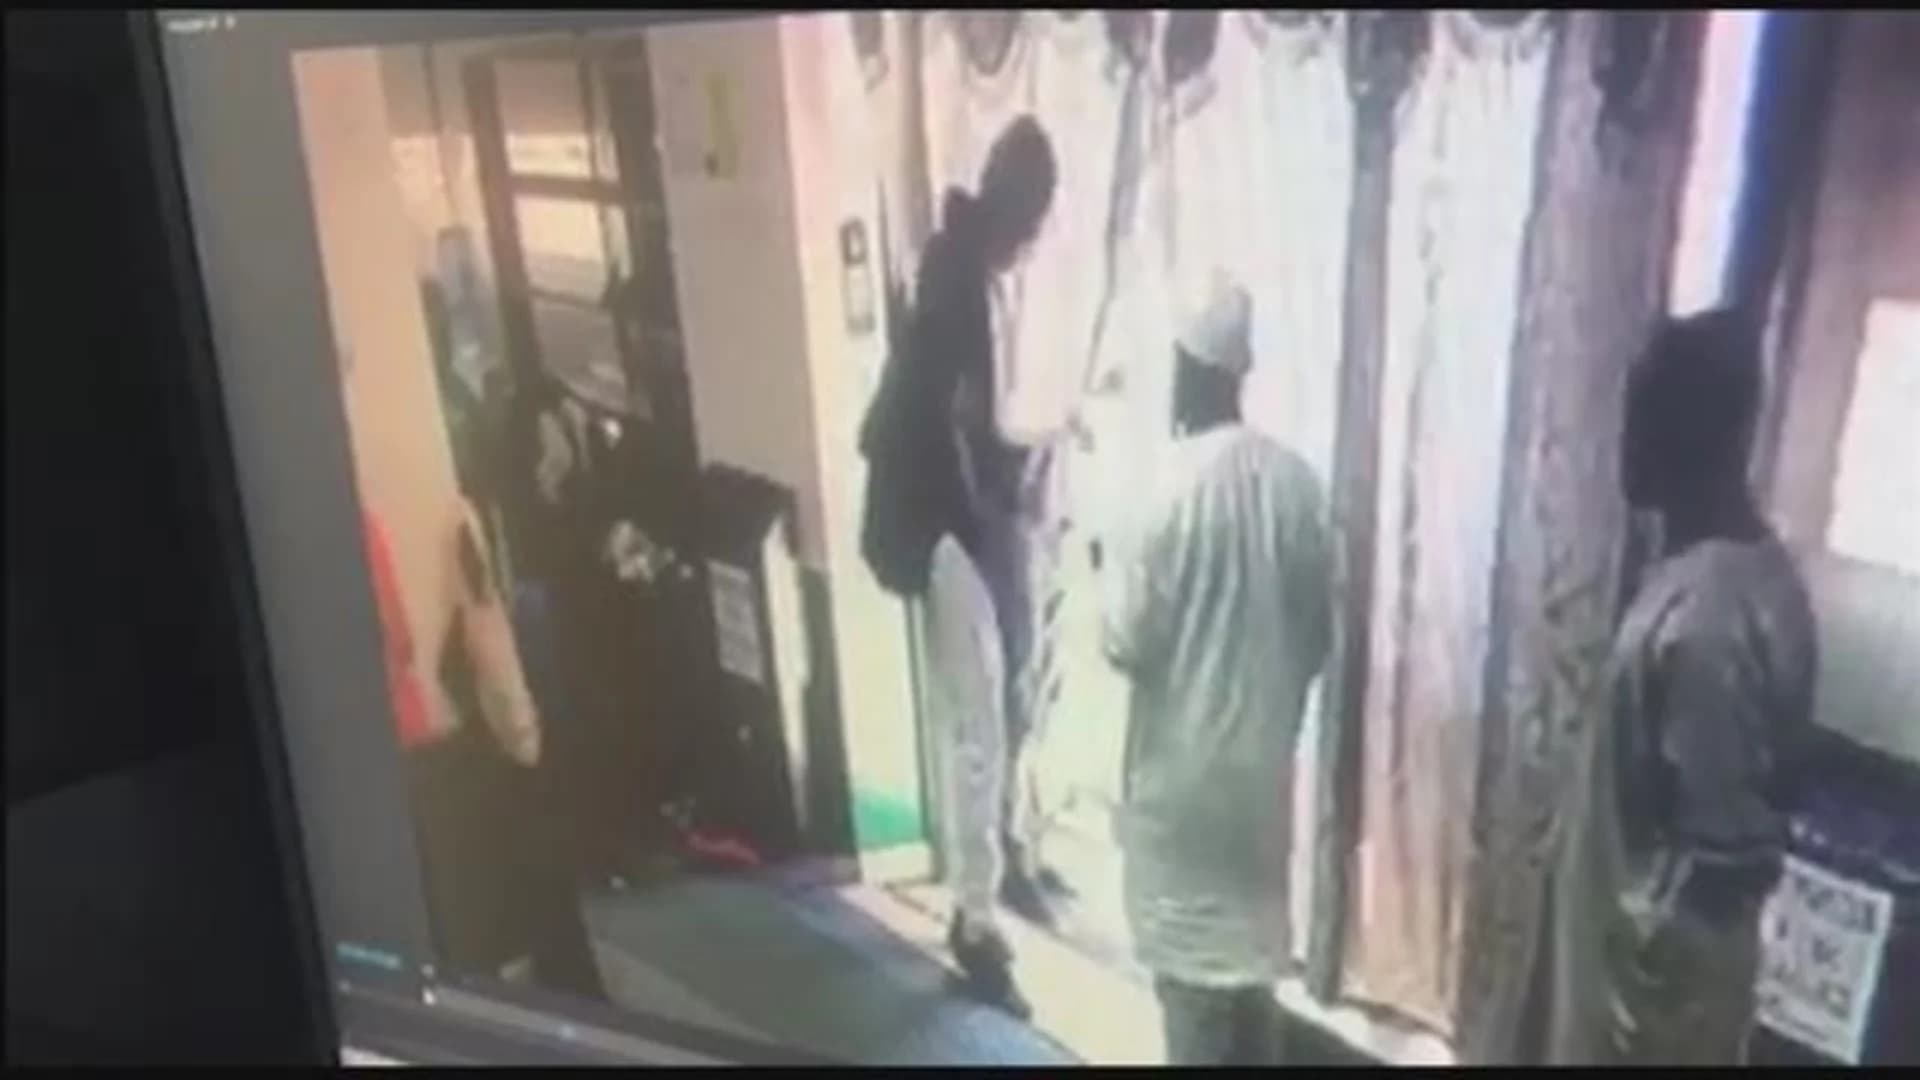 NYPD: Man slashes 6-year-old in mosque